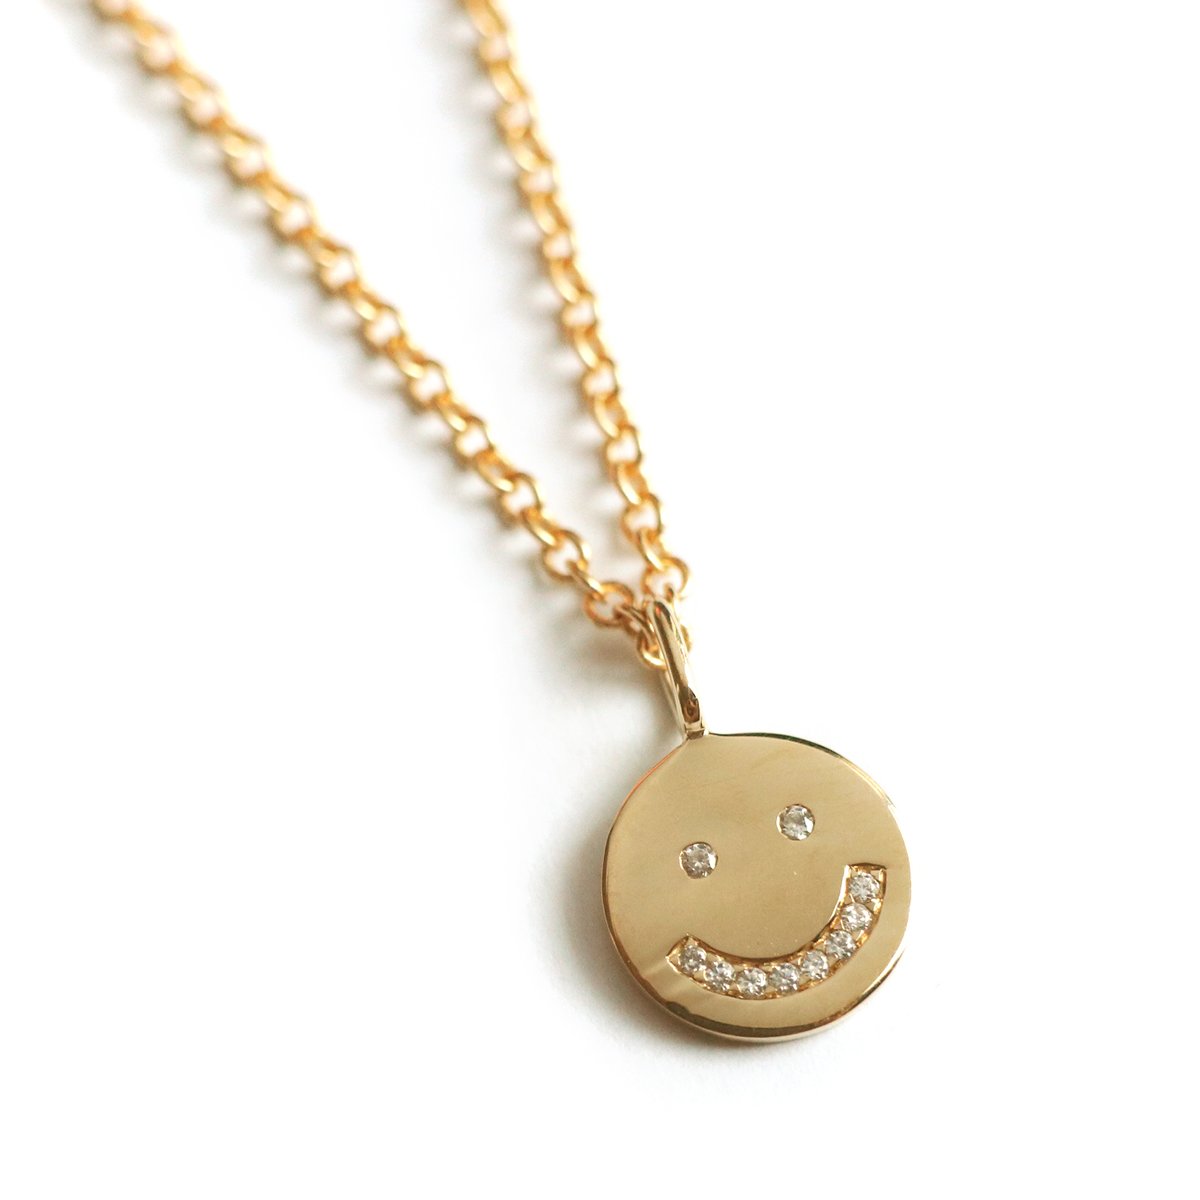 Smiling Face Necklace - Chainless Brain